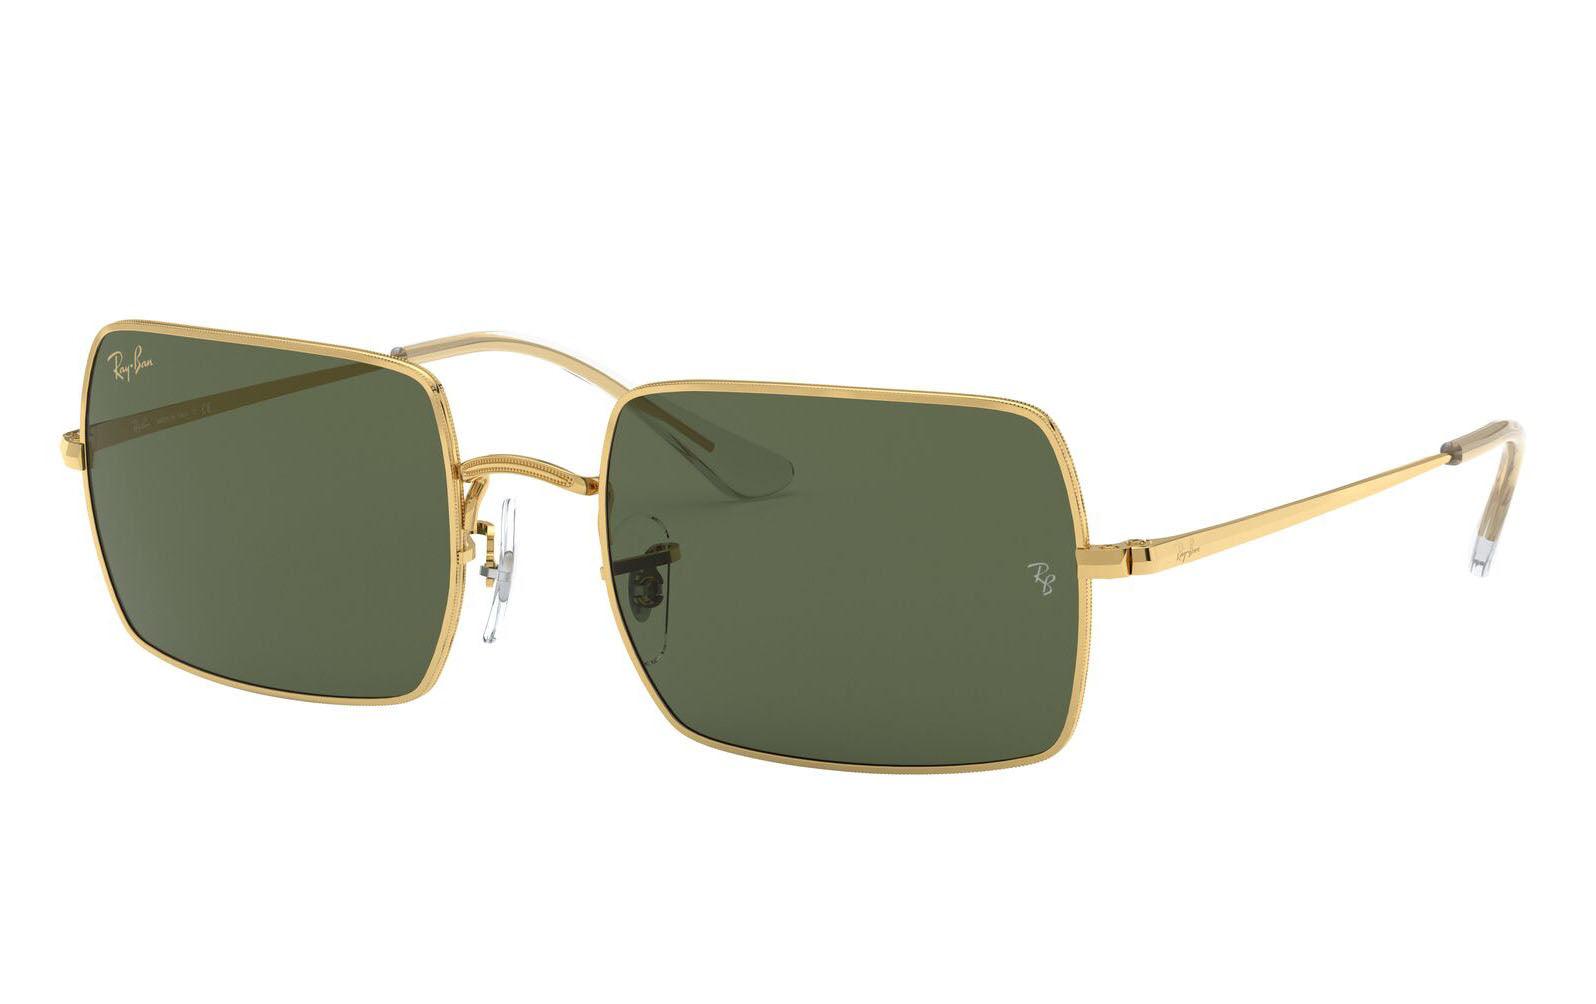 RAY-BAN RECTANGLE 9196 31 - Opticas Lookout